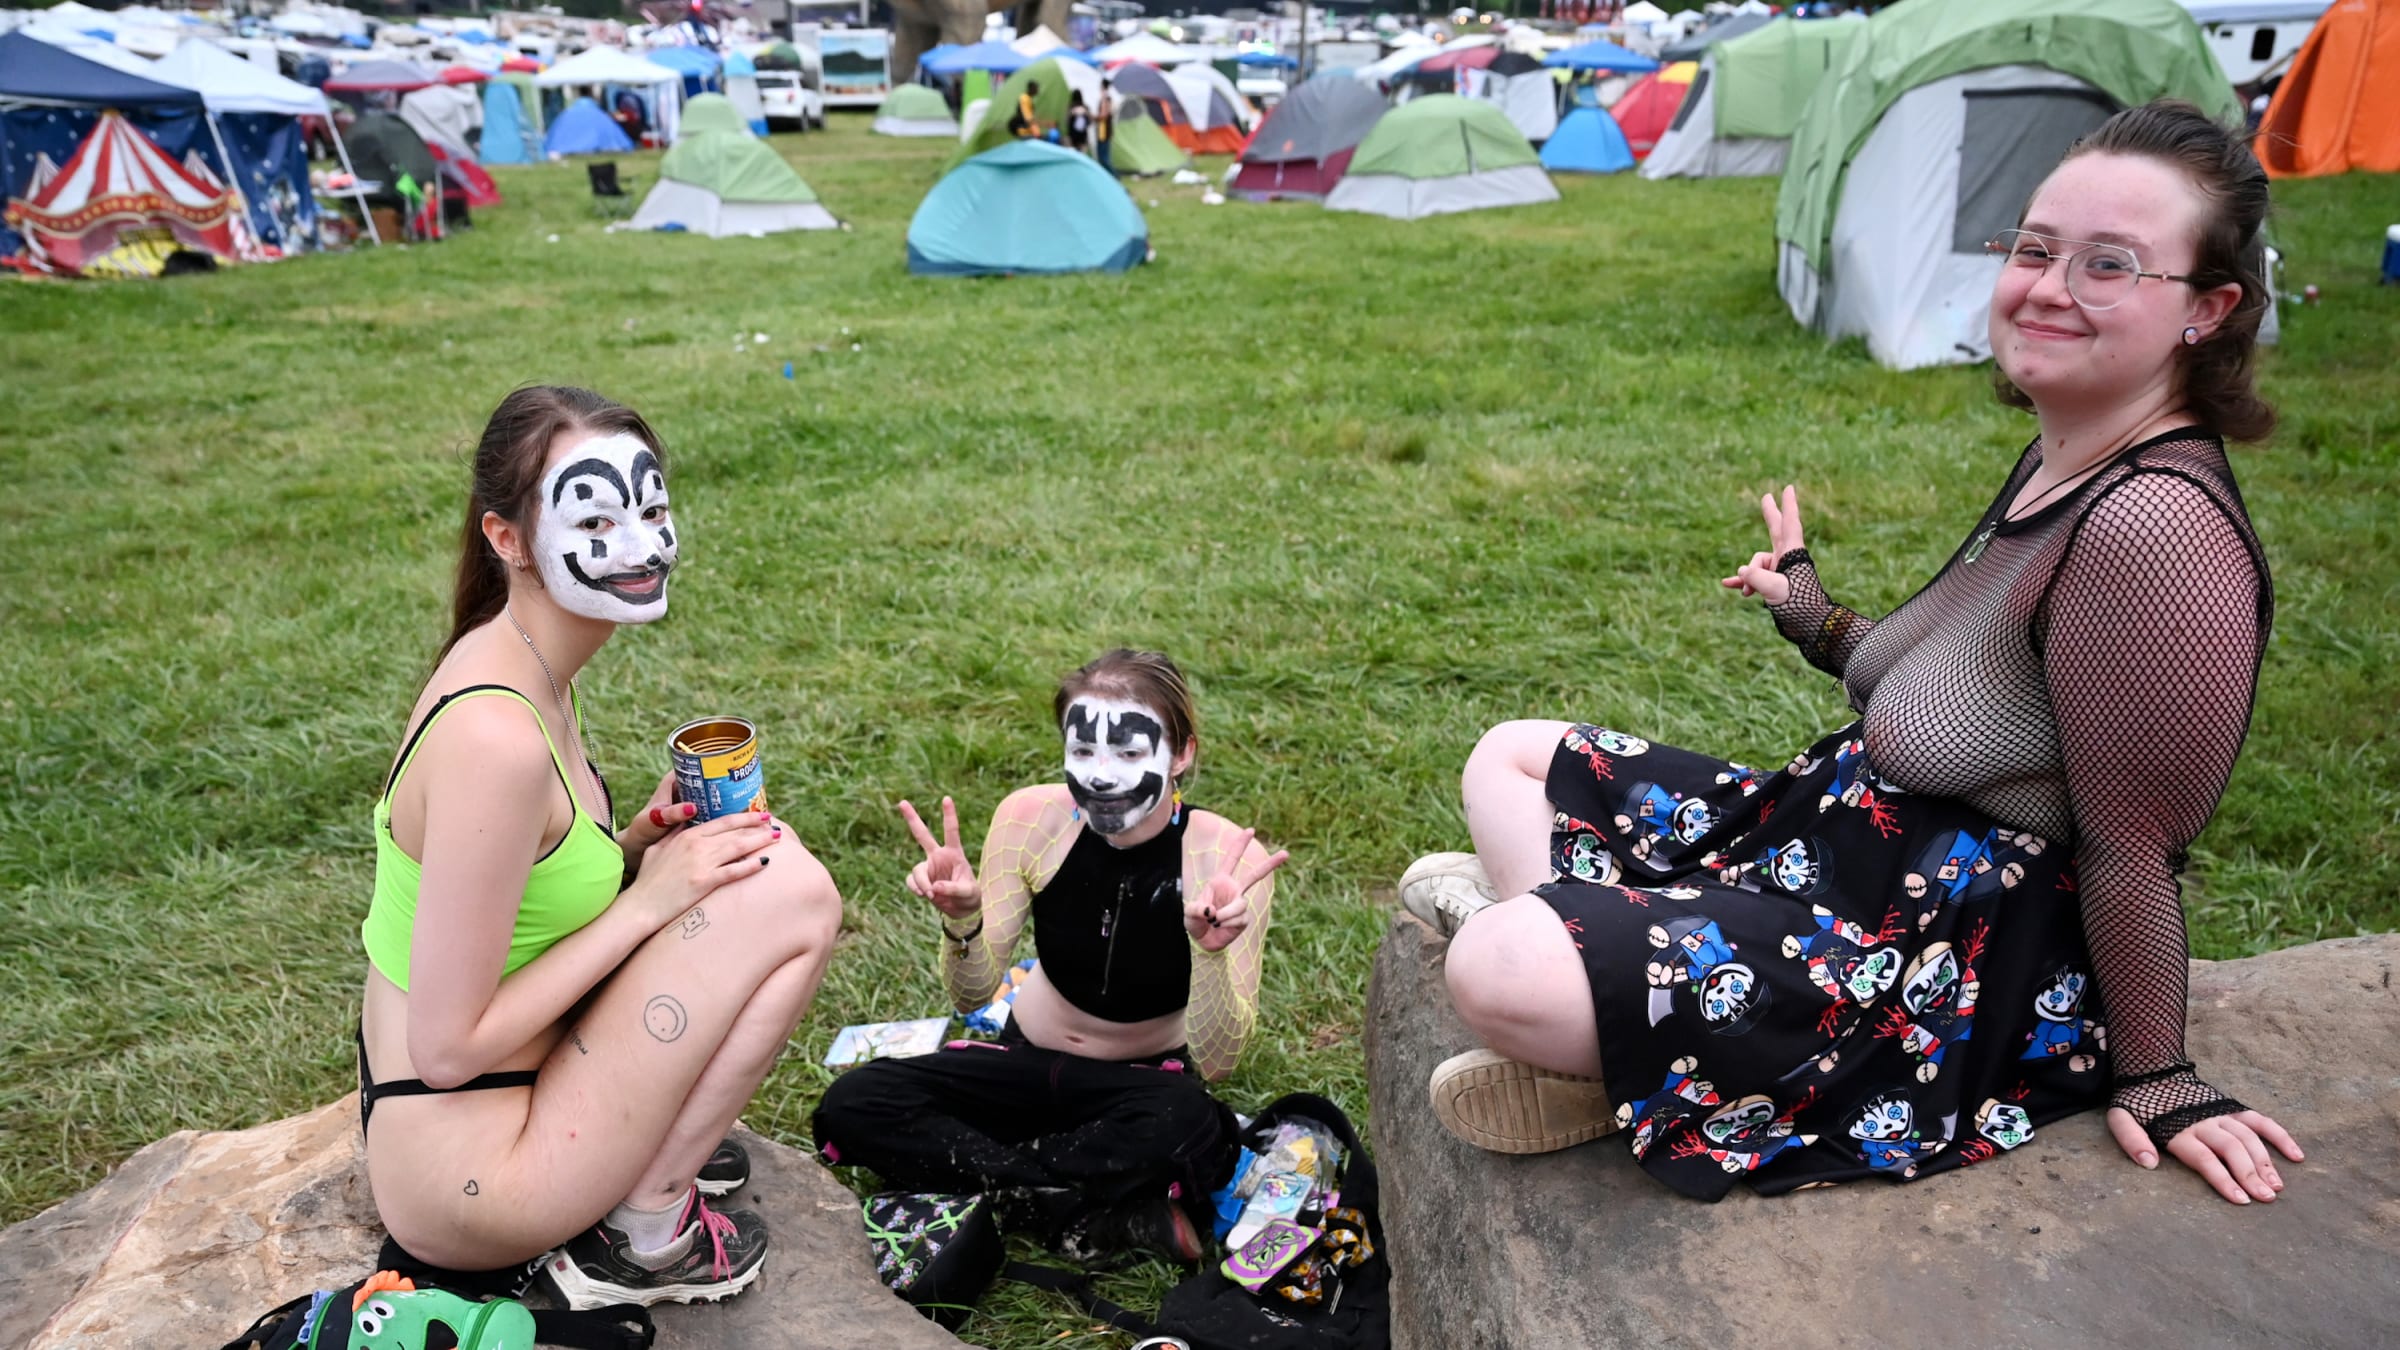 A group of fans pose together at the 2023 Gathering of the Juggalos